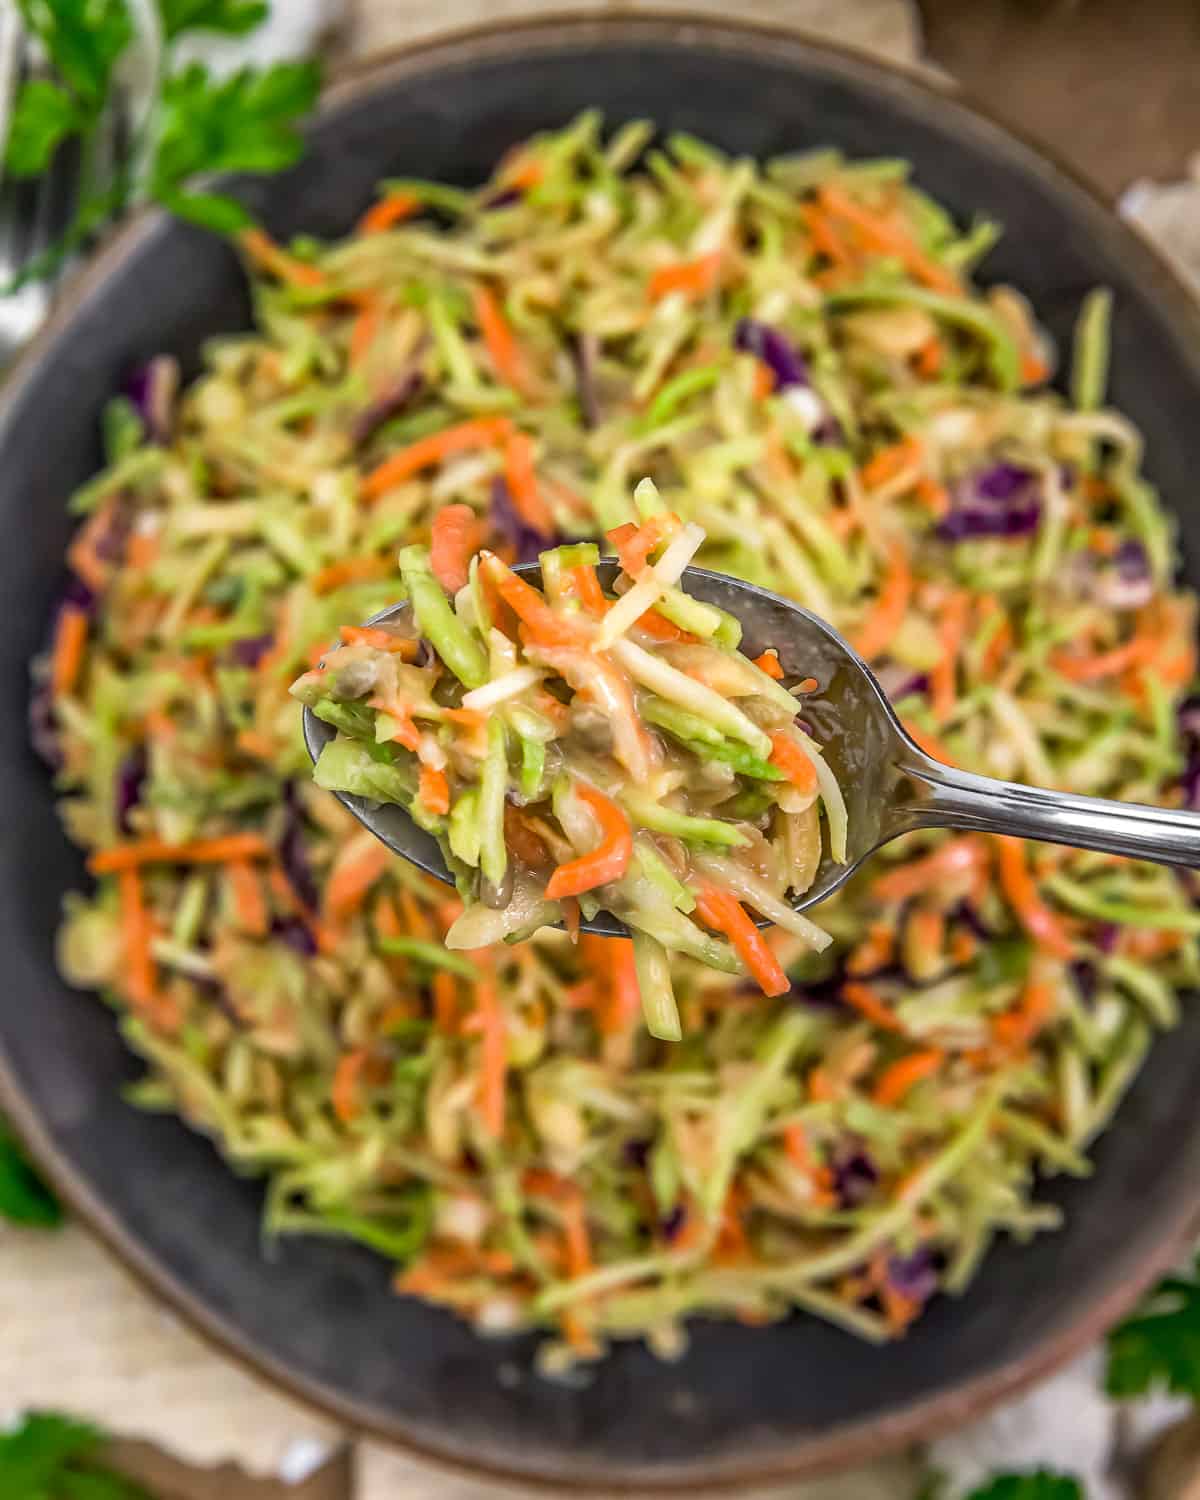 Spoonful of Easy Sweet and Tangy Broccoli Slaw